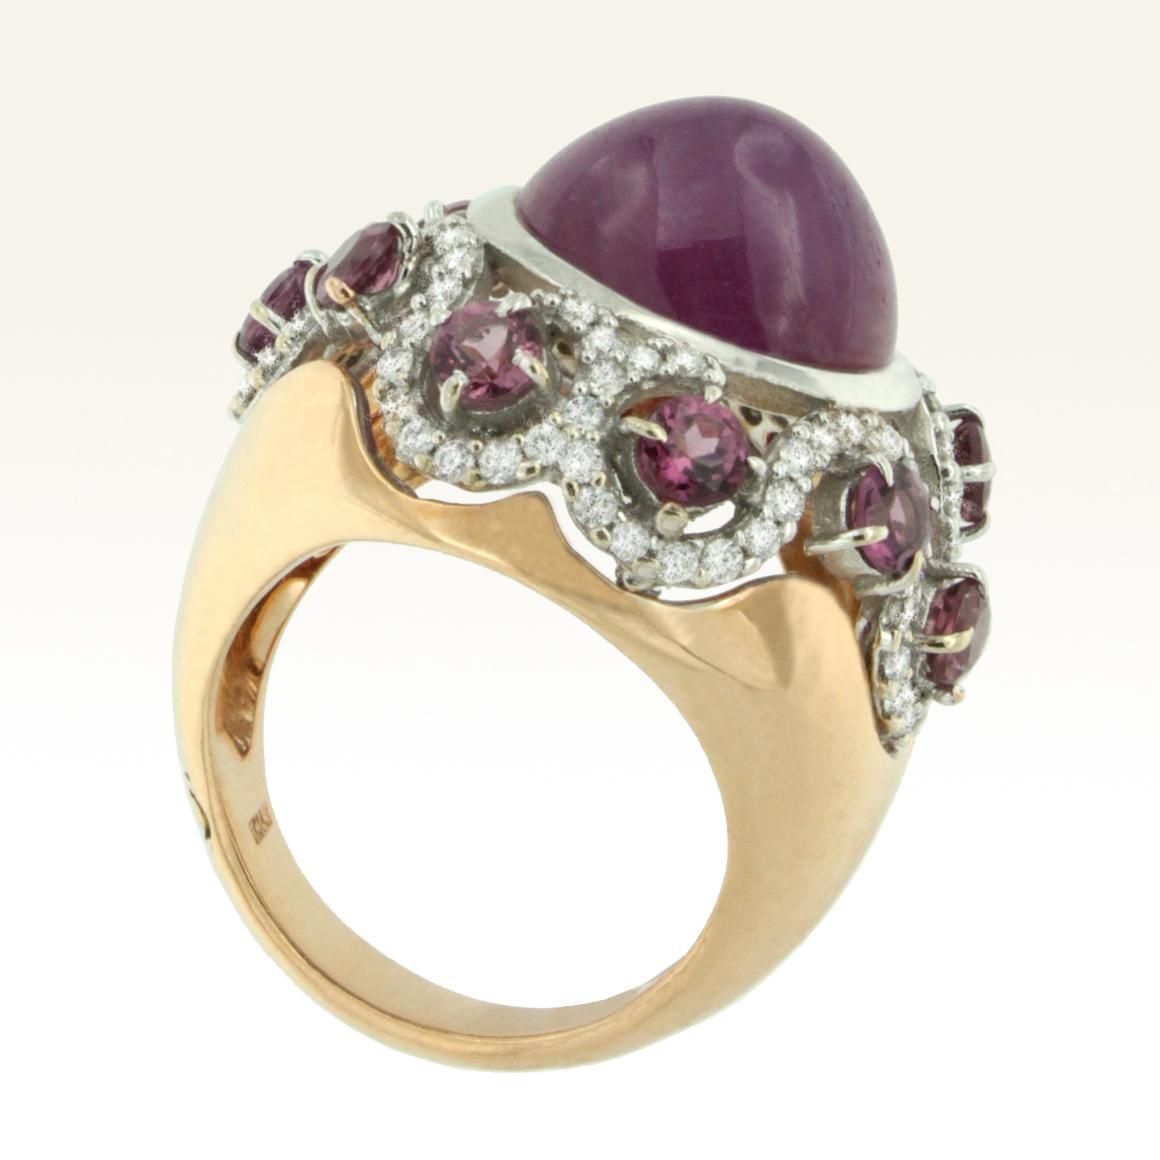 Ring in rose and white gold with oval cabochon Pink Ruby (size mm 11x13) cut Pink Tourmaline (size: 3.5mm),  and diamonds Karat 0.85  Total weight g.18.50
Amazing  ring of refined elegance,  the combination of the color of the stones and  the